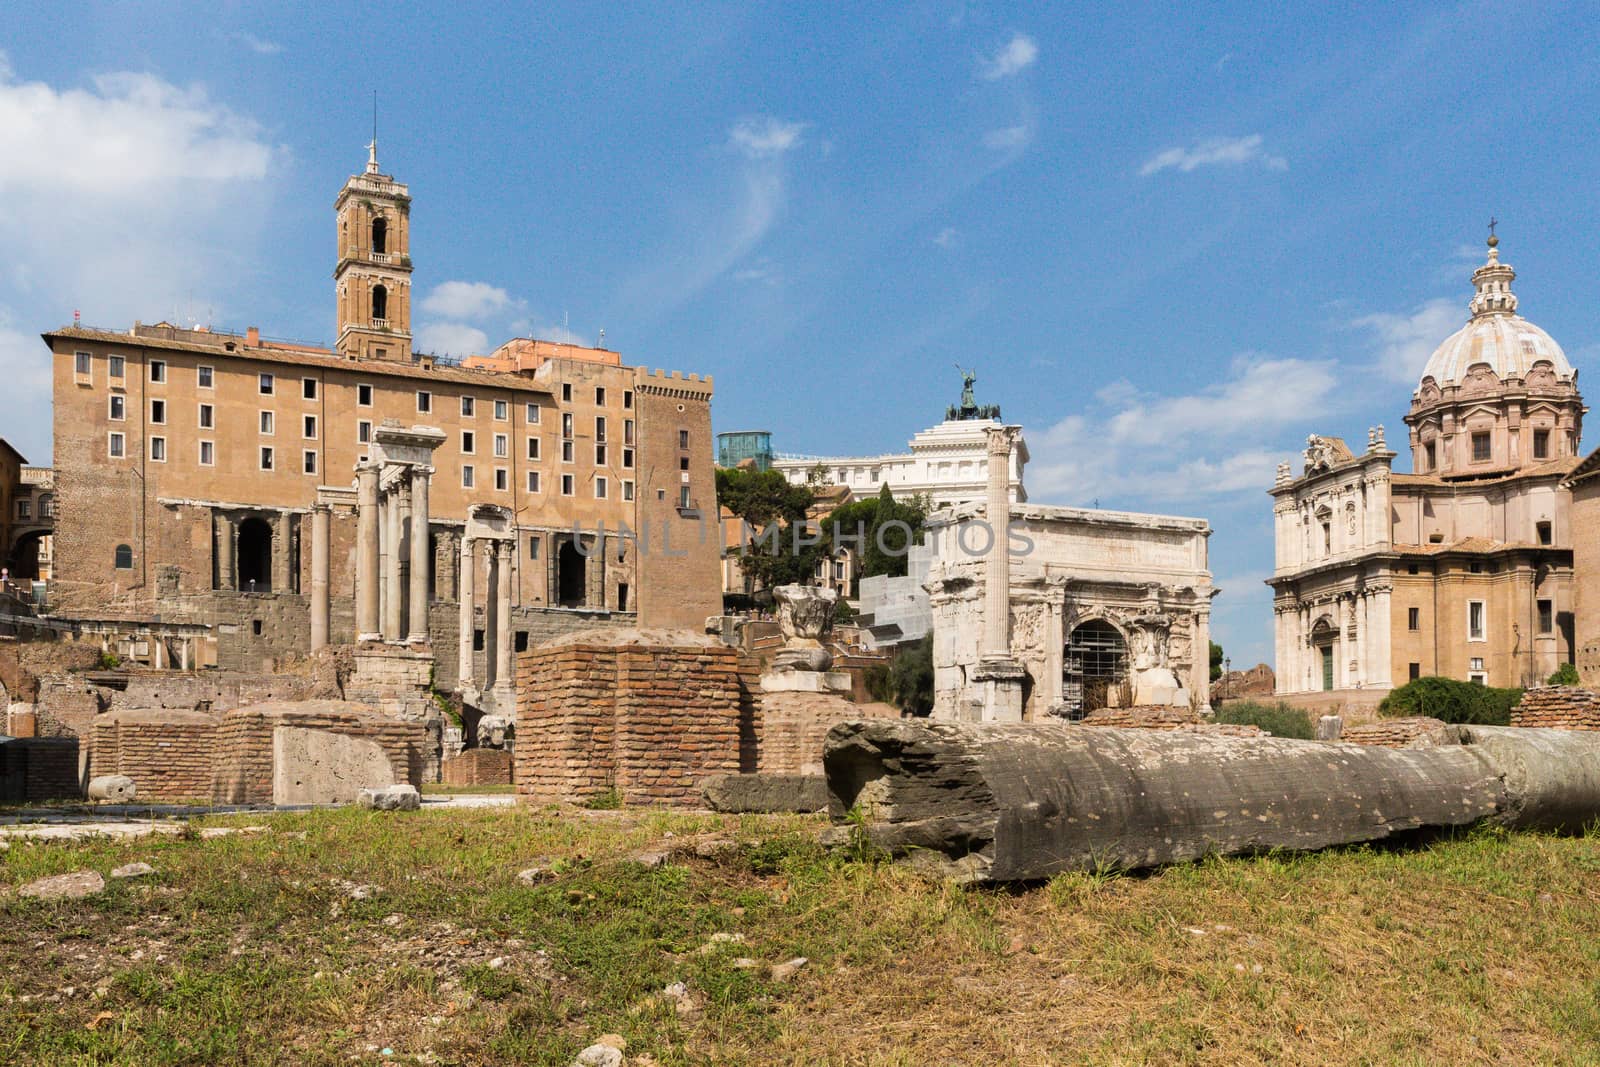 The Forum in Rome by chrisukphoto